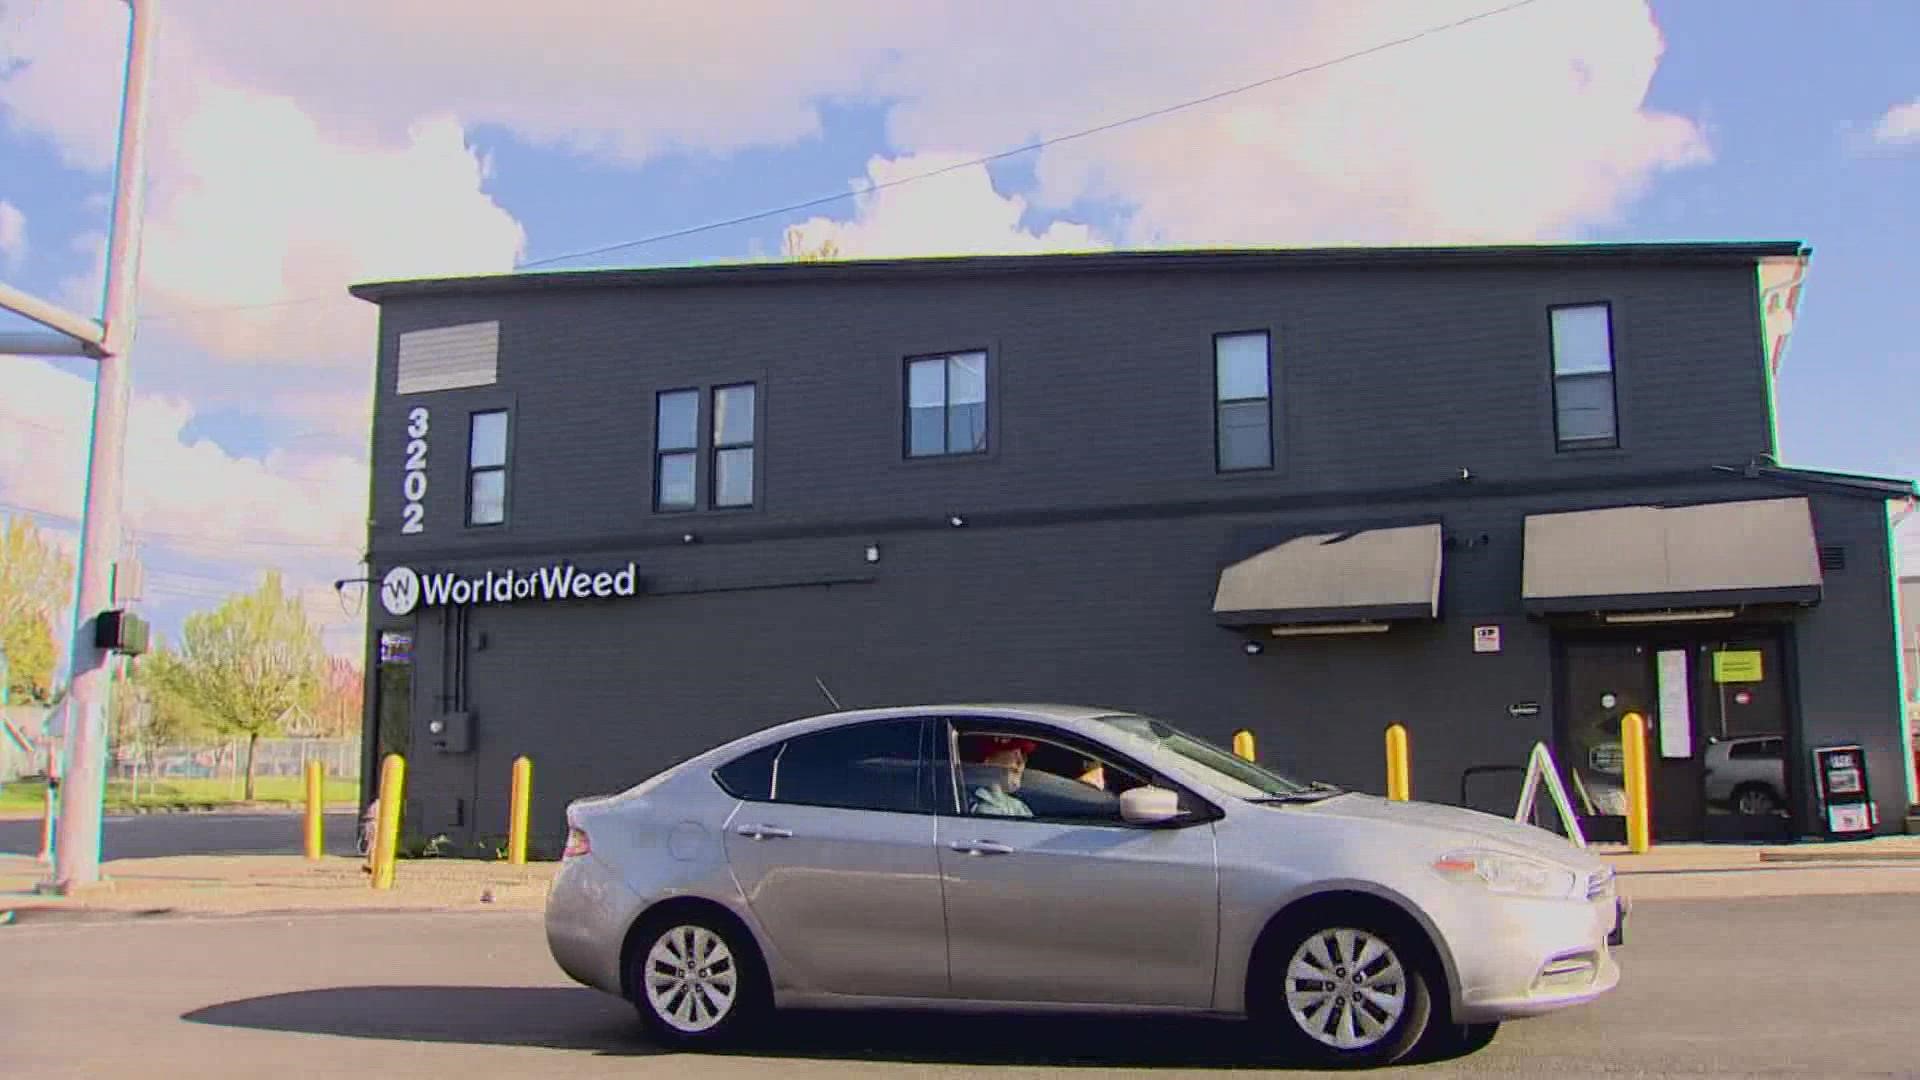 World of Weed reopened Tuesday after closing for over a month following the killing of a 29-year-old employee in an armed robbery.